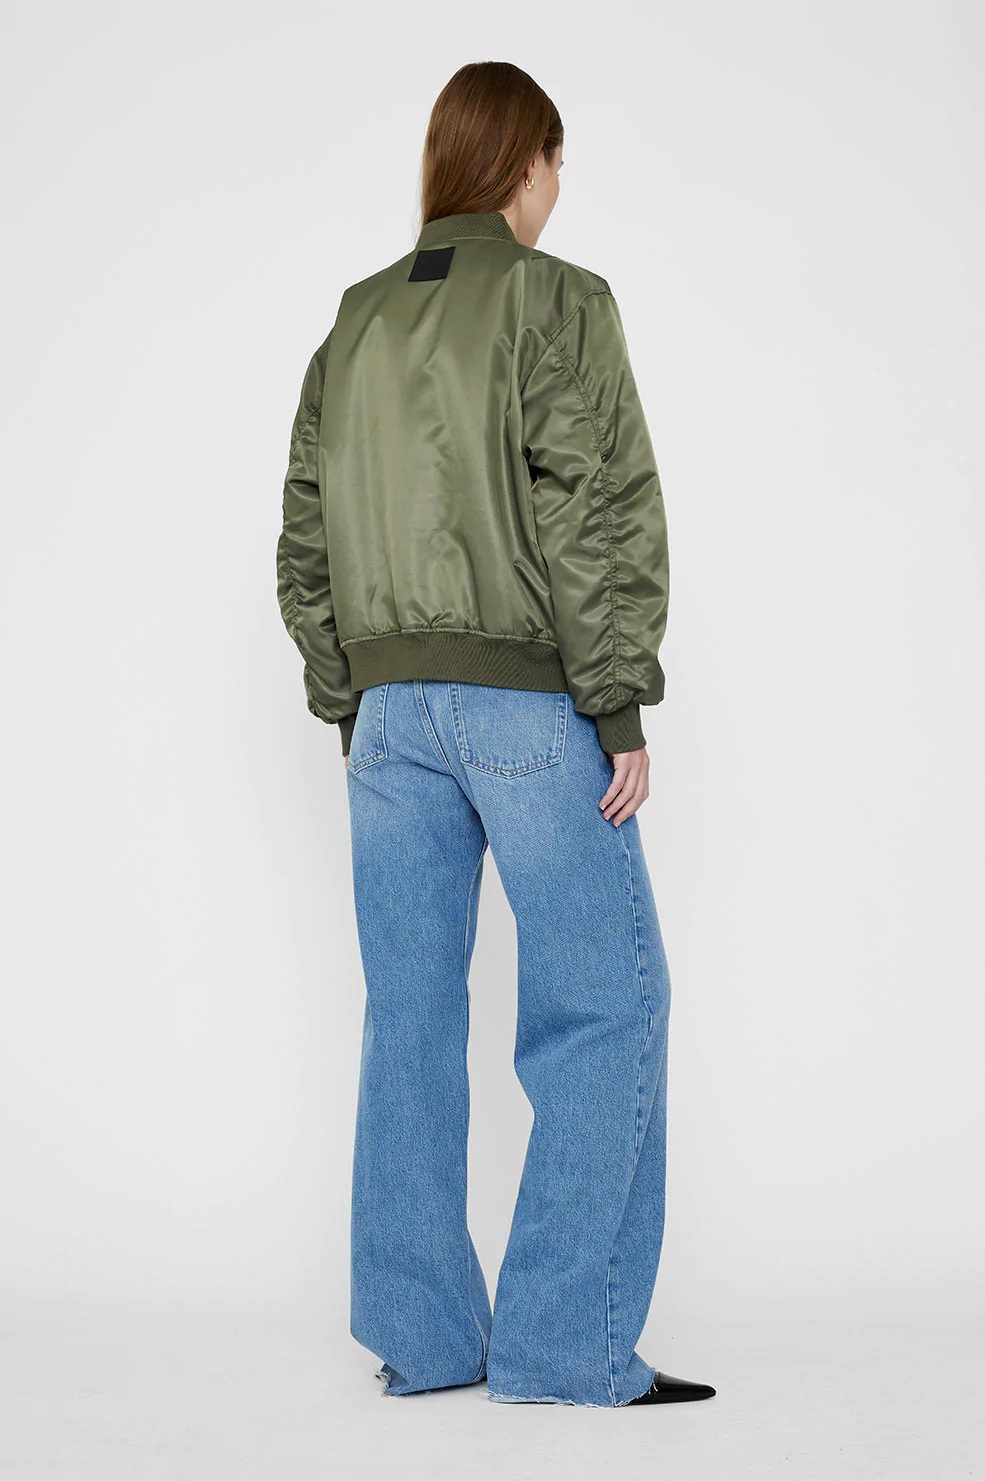 ANINE BING Leon Bomber Jacket in Army Green